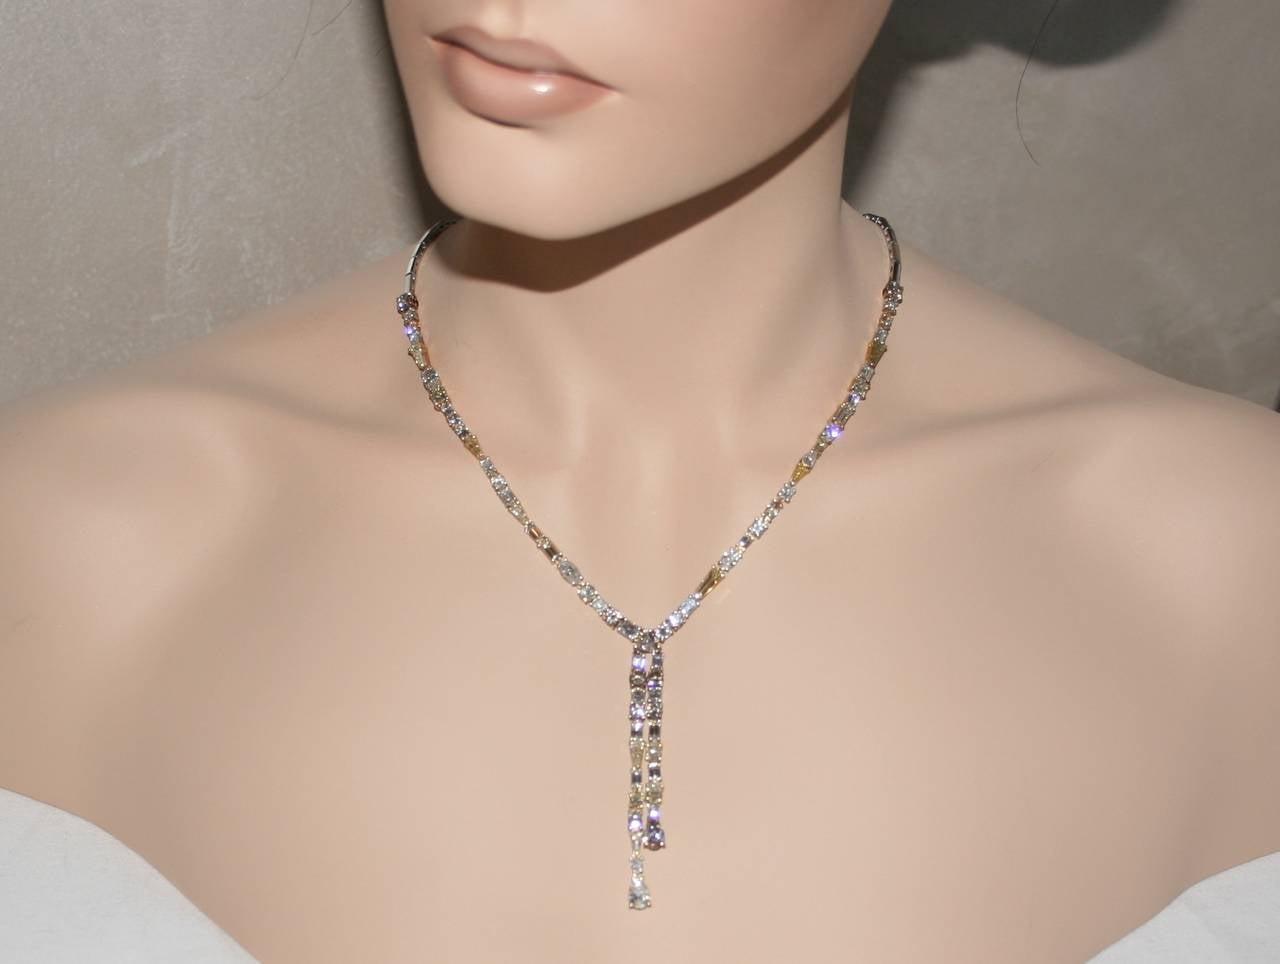 Fancy Colors & Shapes Diamond Necklace.
The necklace 14KWYR Gold.
There are 17.42 Carats in Diamonds VS/SI.
The diamonds are fancy colors and fancy shapes.
The necklace has white, yellow, brown, green, and many other fancy colors.
The white diamonds